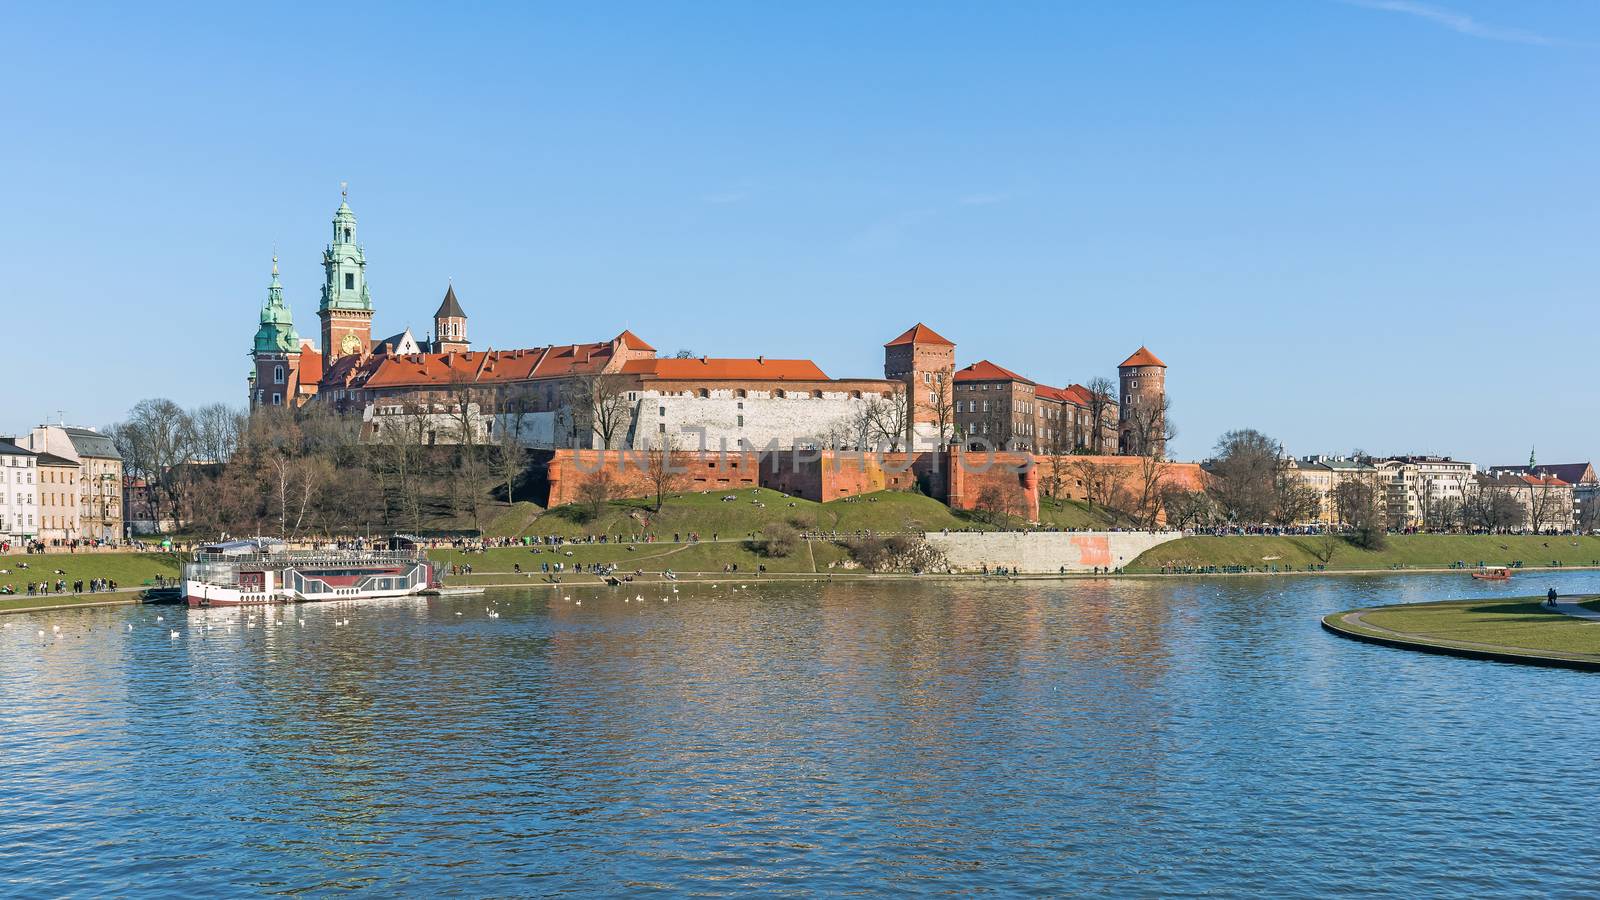 The Royal Castle at the Wawel Hill in Krakow, Poland.